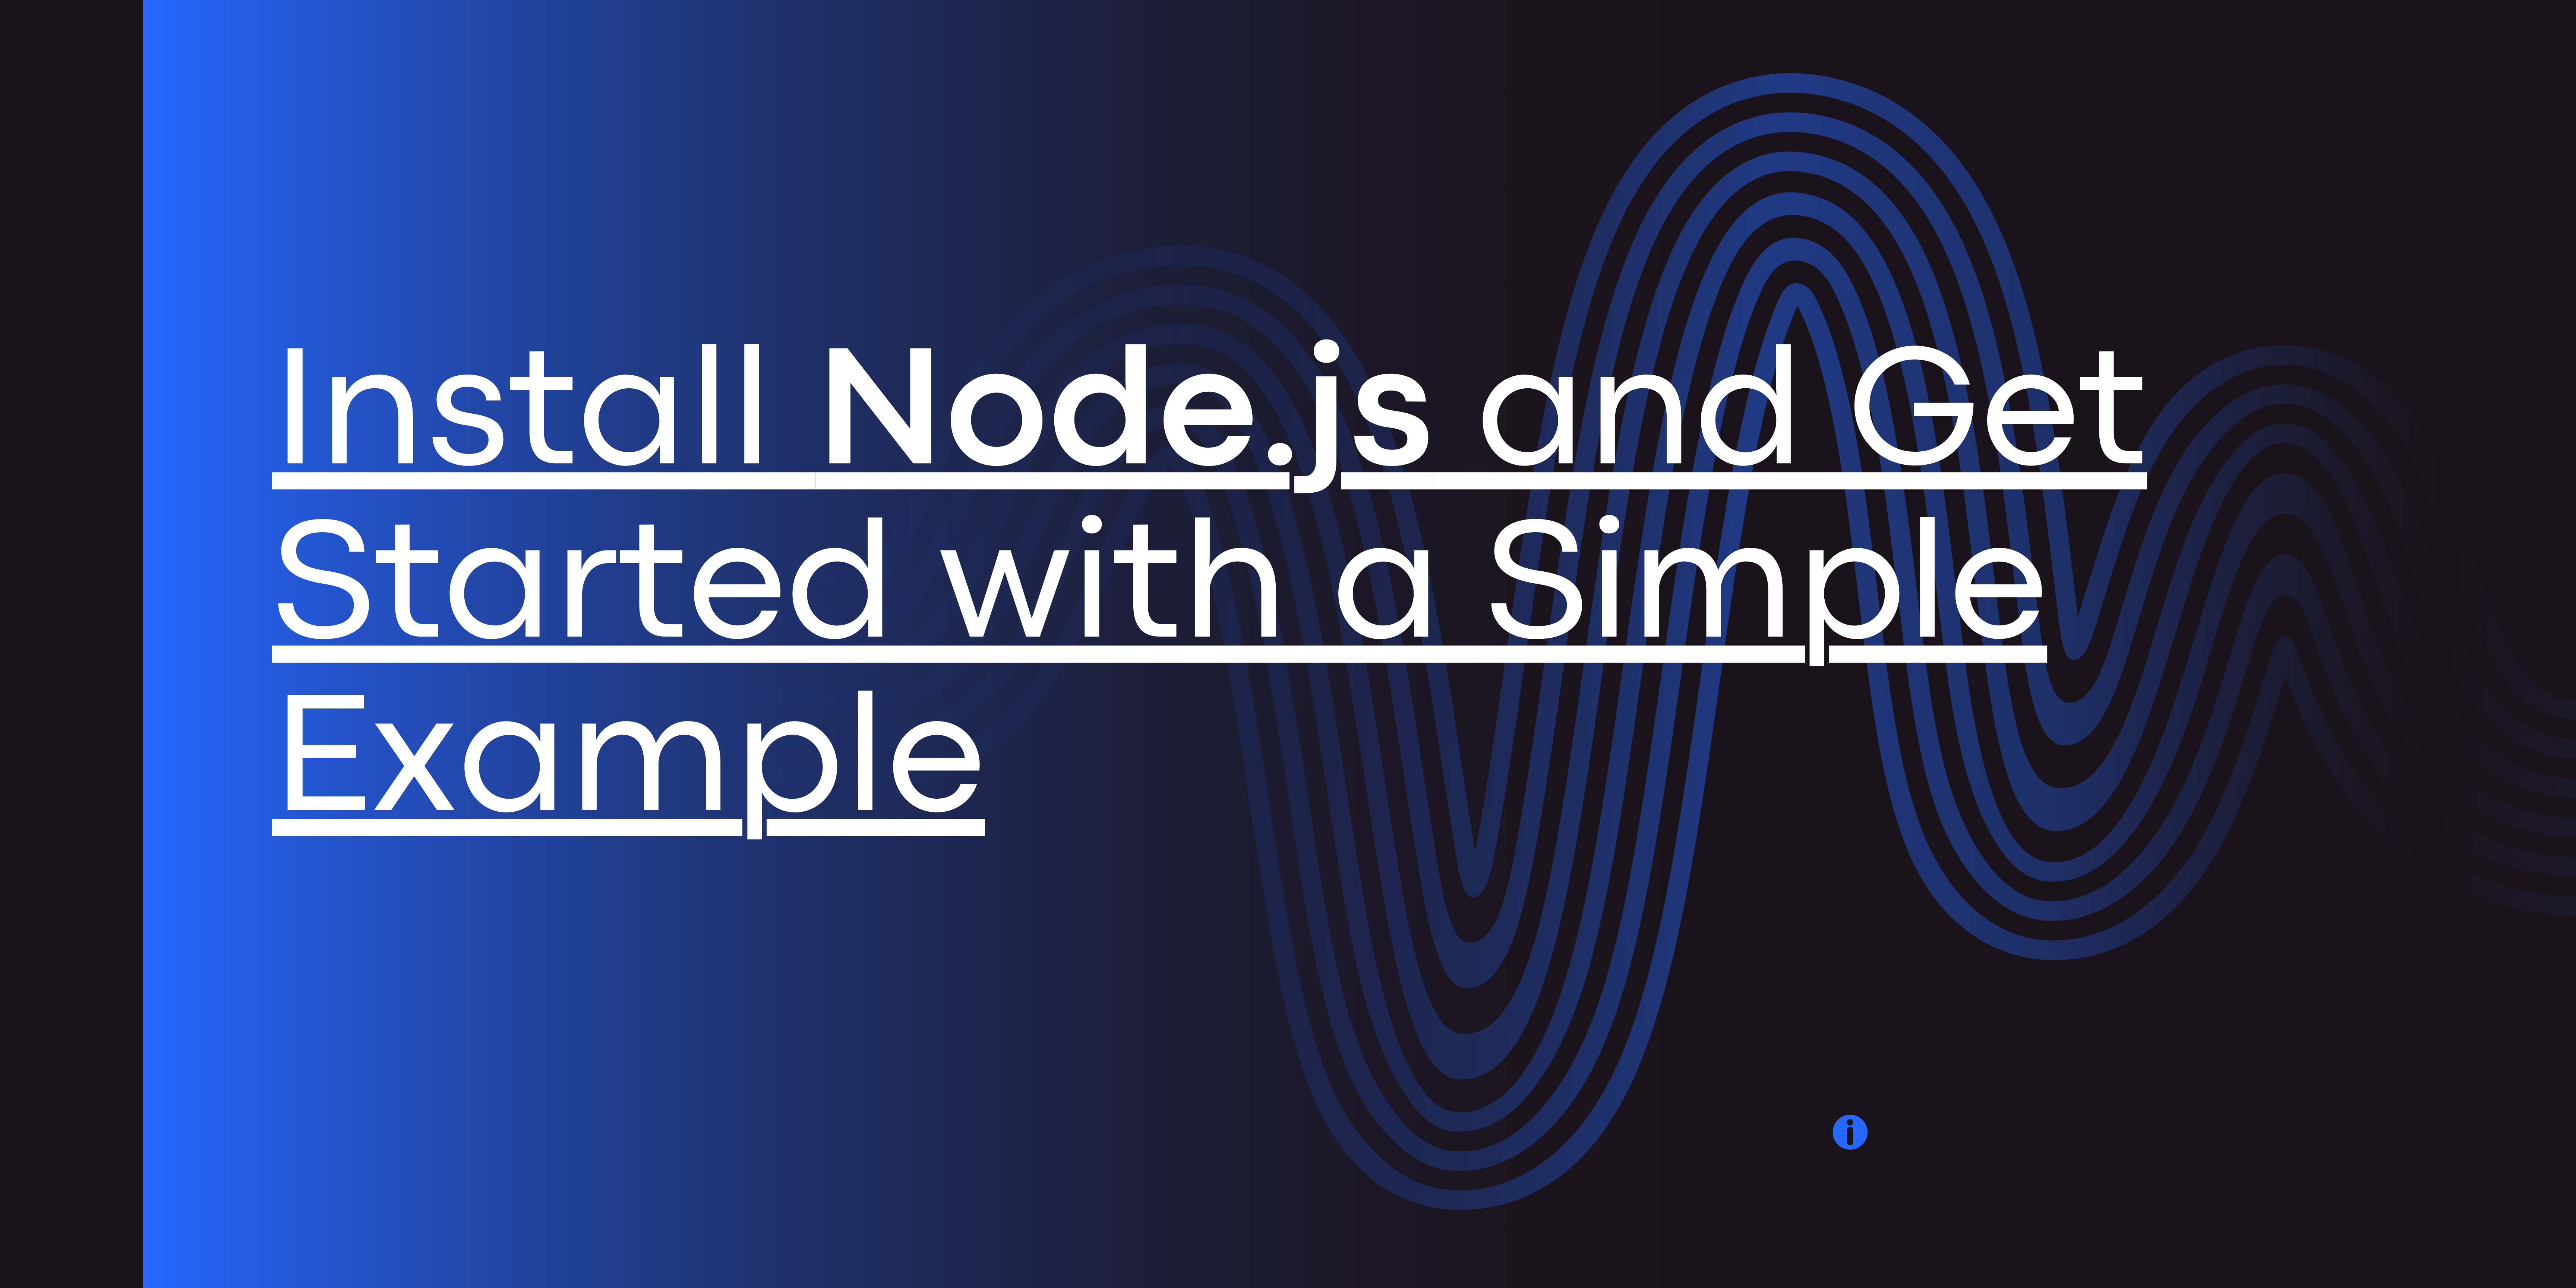 Install Node.js and Get Started with a Simple Example